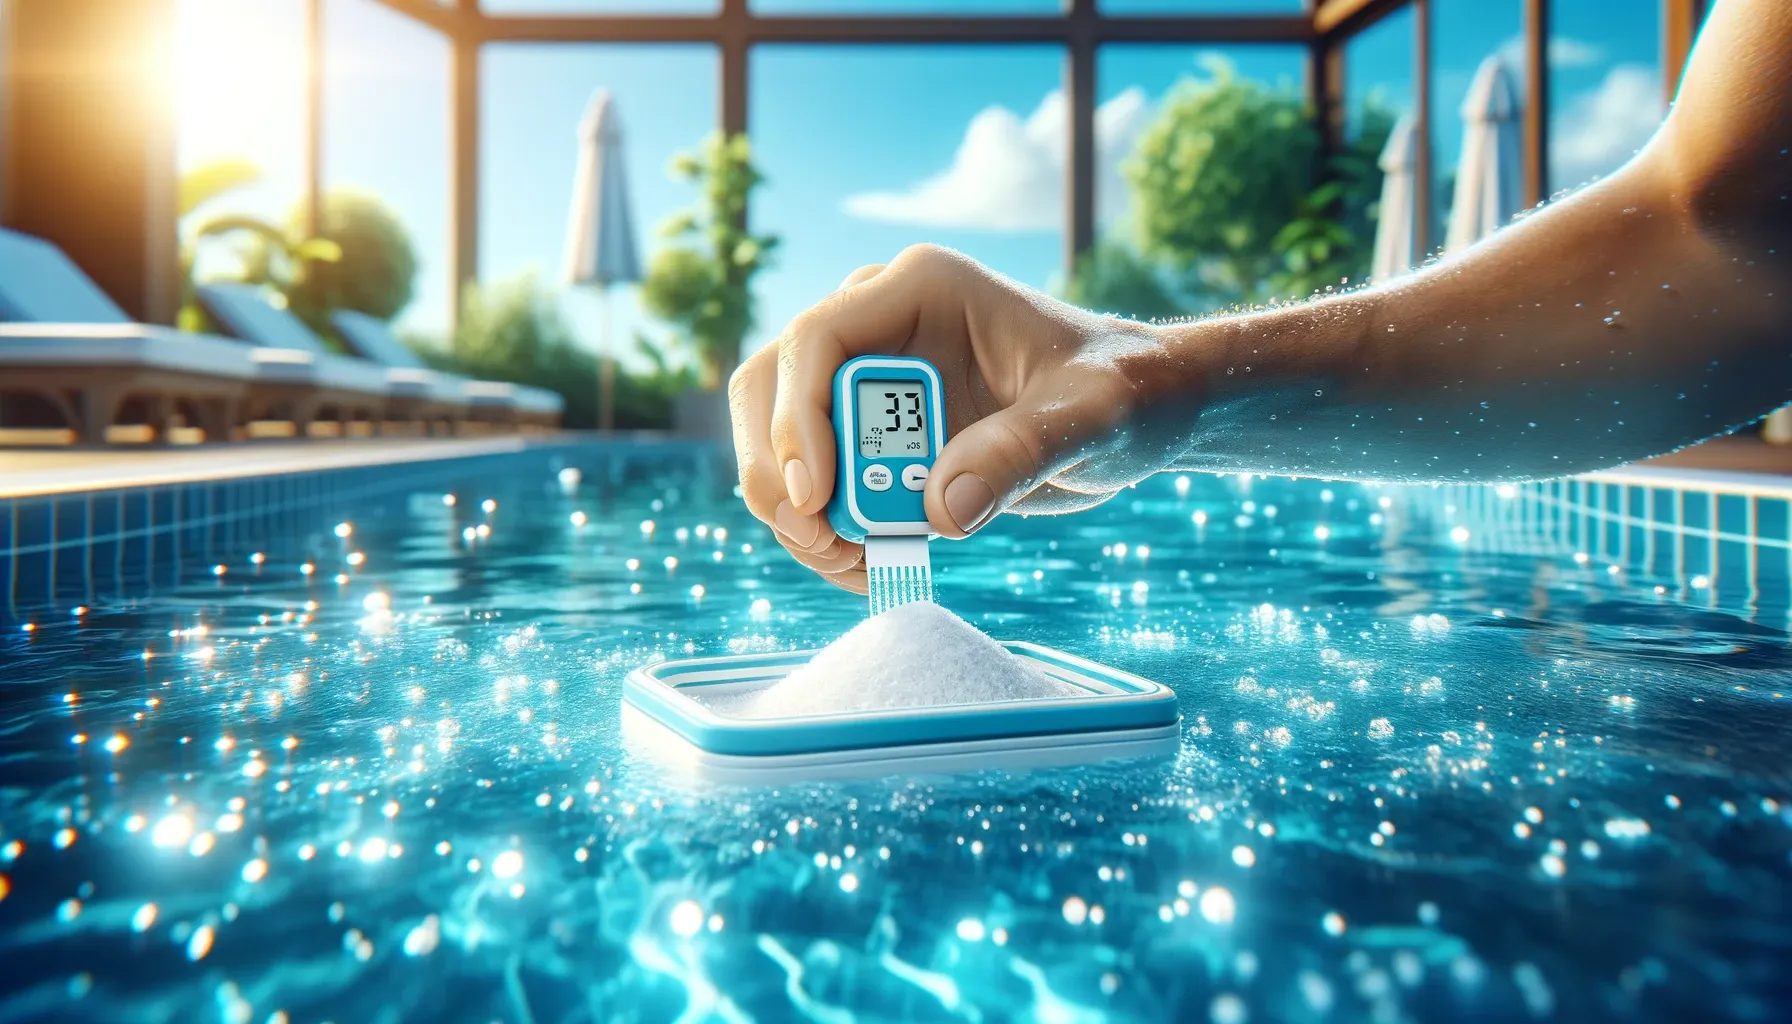 How Do You Know If Your Pool Needs Salt?